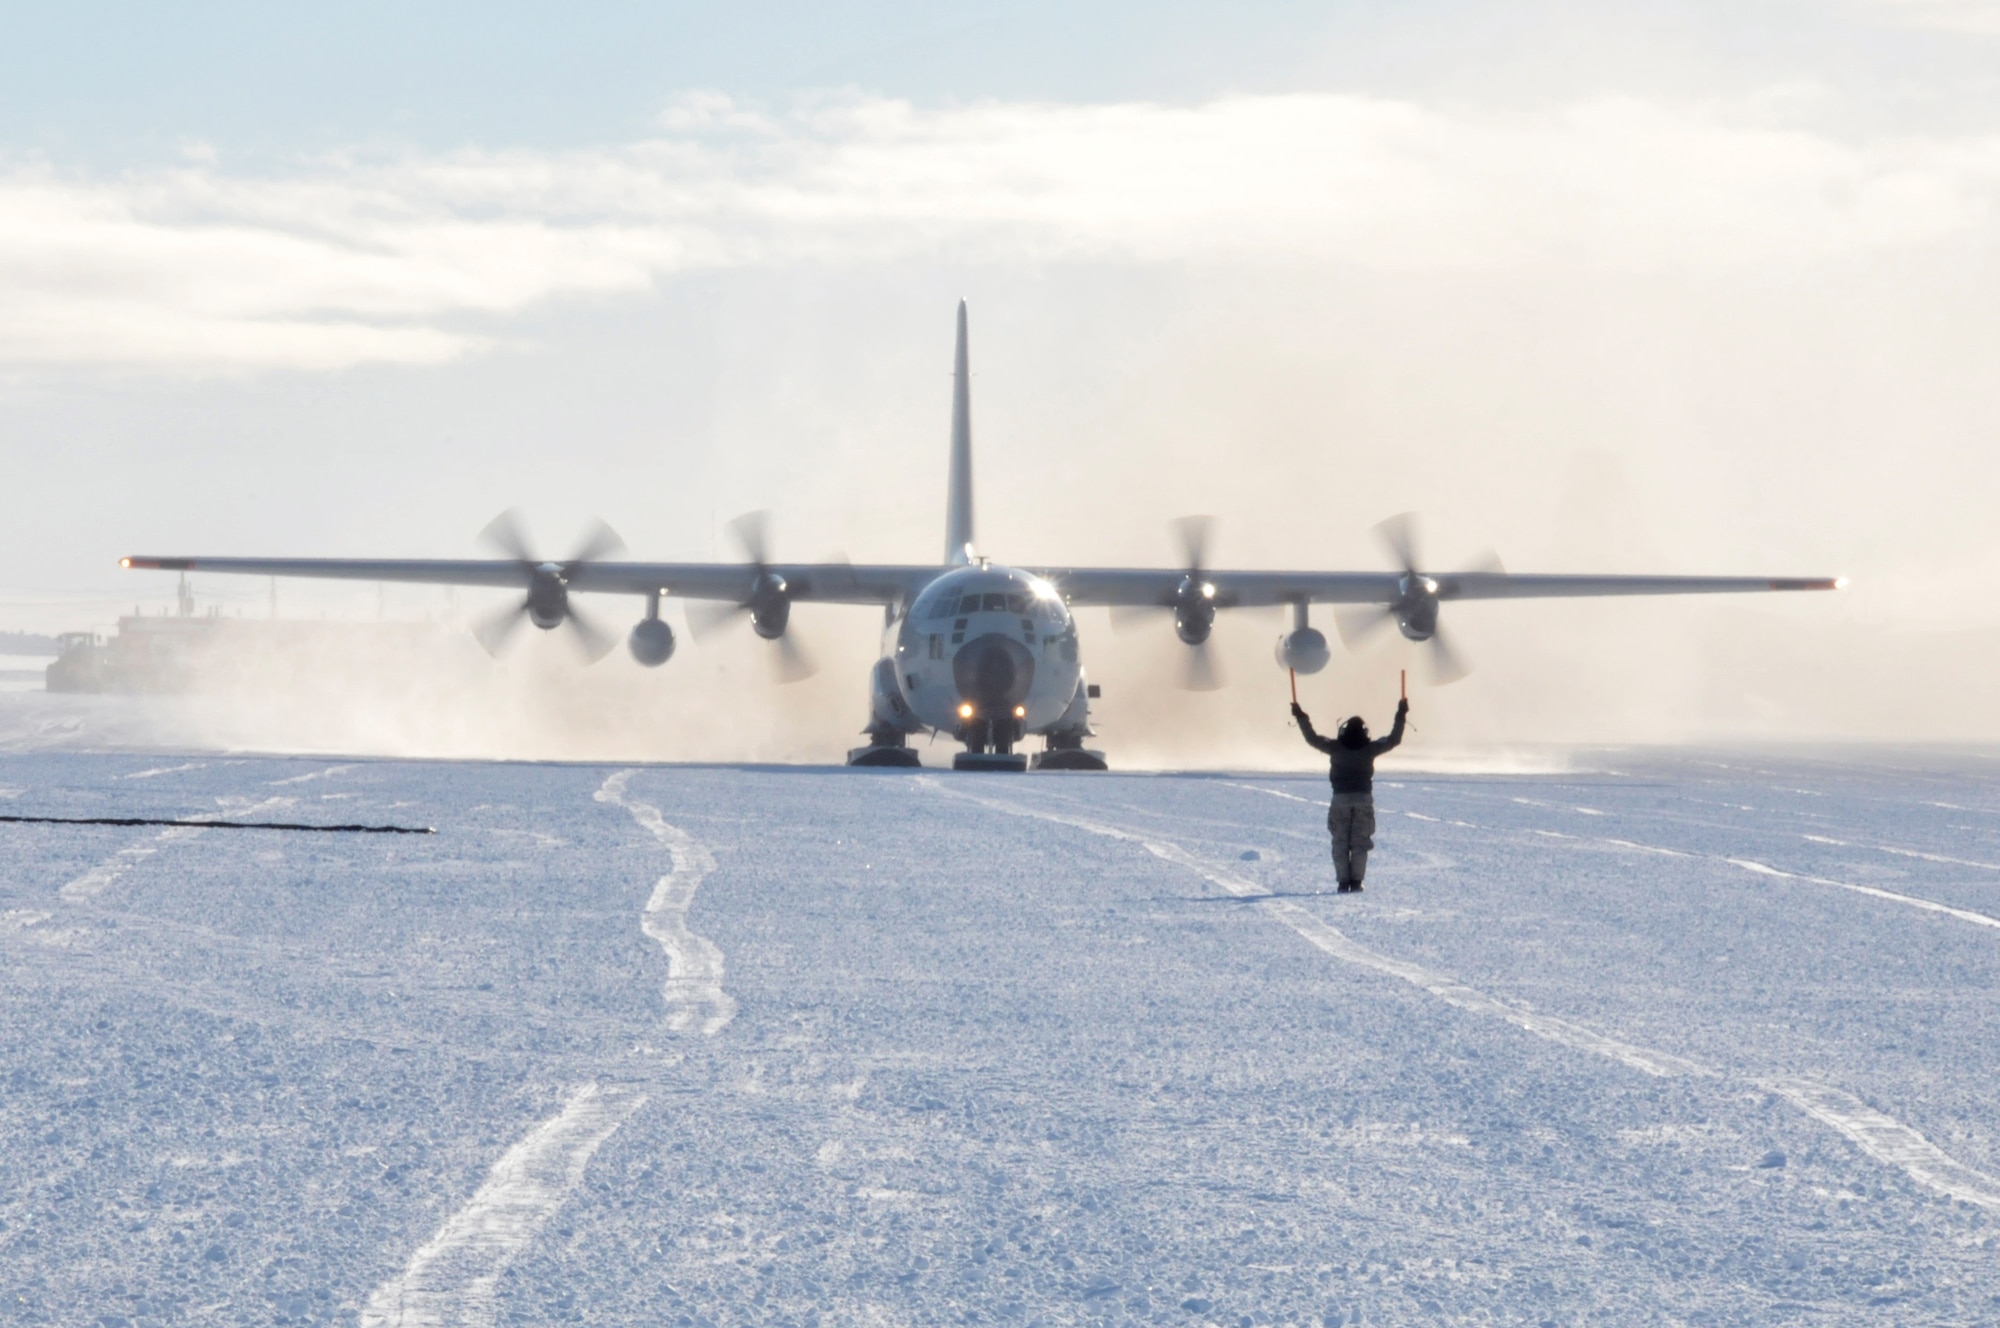 Staff Sgt. Latisha Webb, 139th Expeditionary Airlift Squadron crew chief, taxis an LC-130 “Skibird” into the fuel pit on the Williams Field skiway at McMurdo Station, Antarctica, on Nov. 6, 2017.